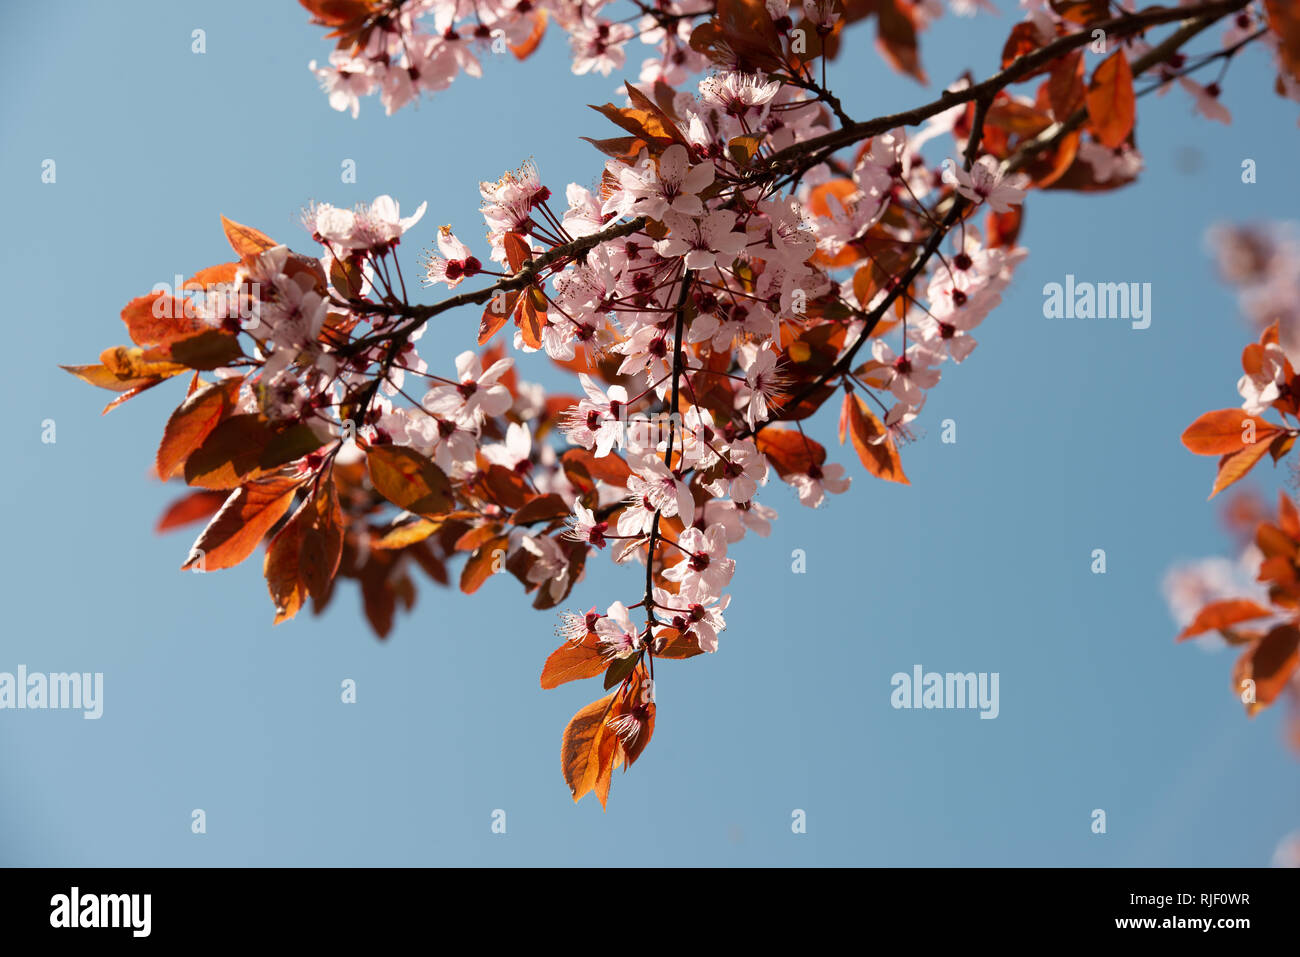 flowering plant with white blossoms and orange brown leafs against blue sky Stock Photo